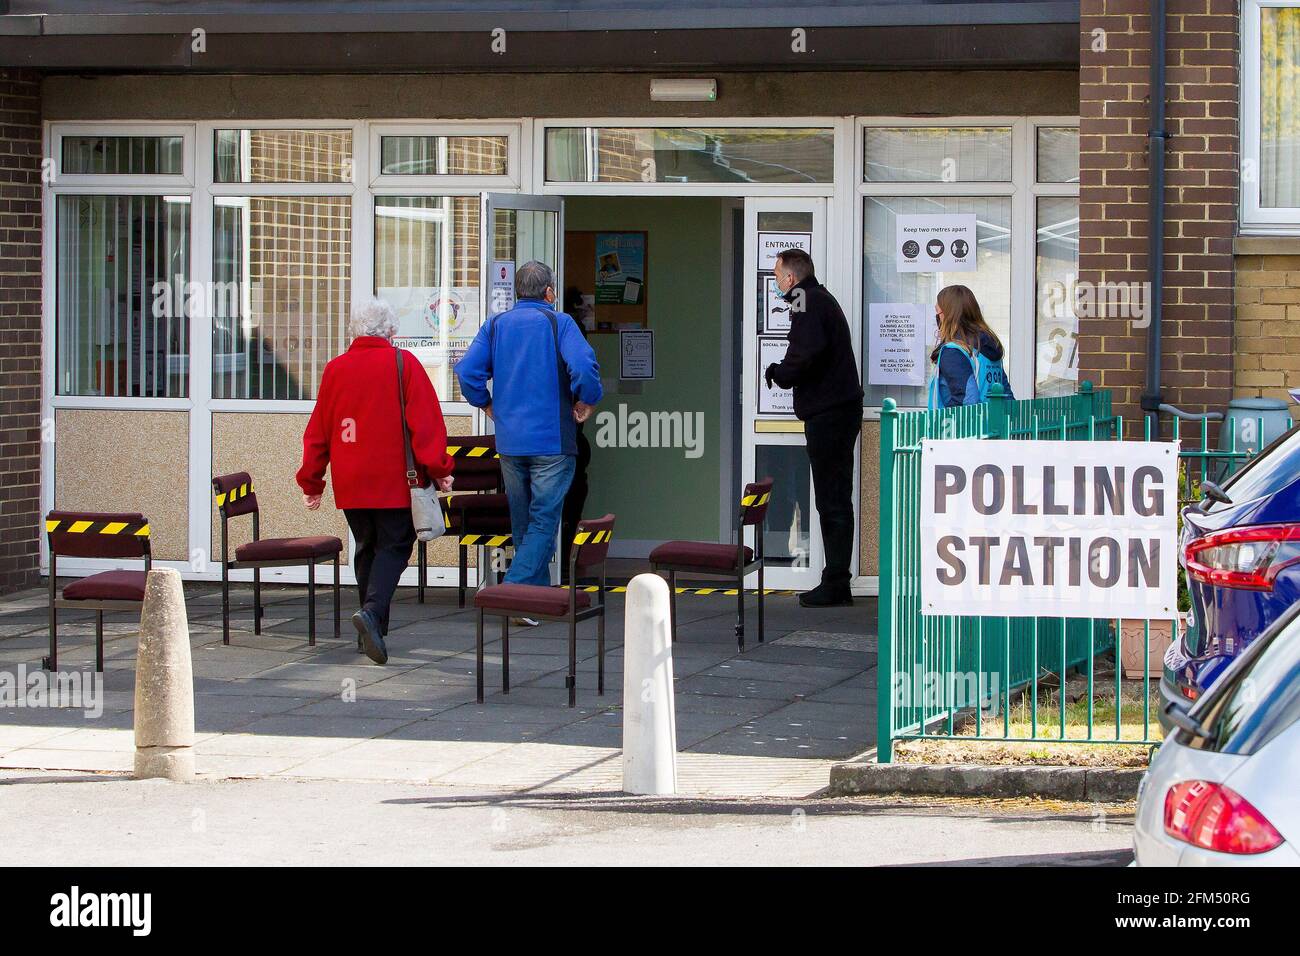 Honley, Holmfirth, Yorkshire, UK, 06 May 2021. Voters arrive to cast their ballots in Honley for the local elections and for the inaugural West Yorkshire mayoral election. RASQ Photography/Alamy Live News. Stock Photo